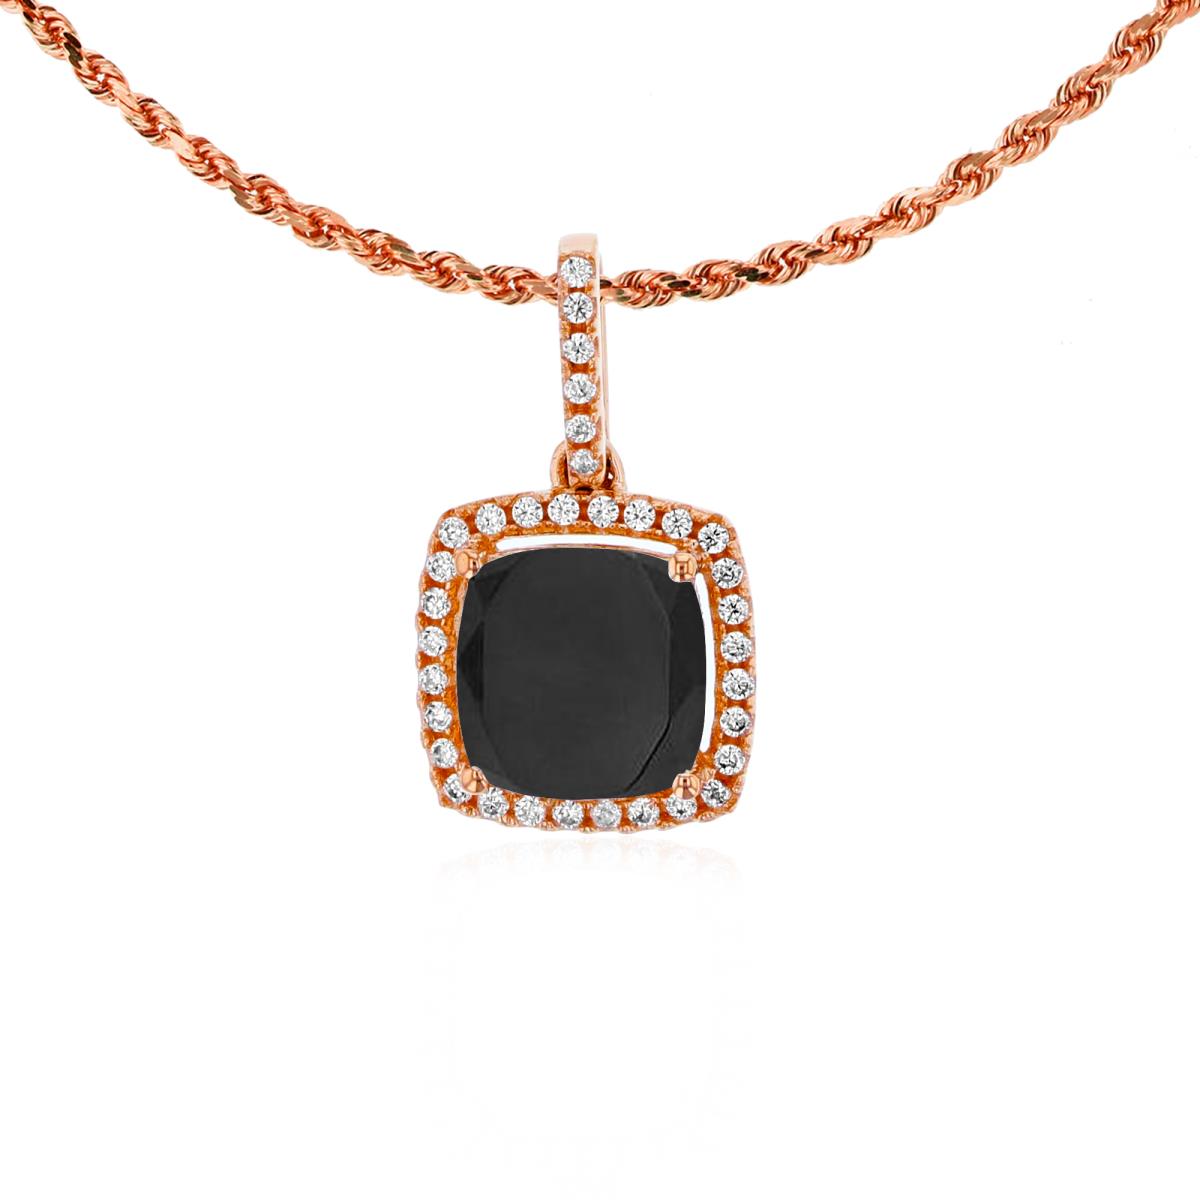 10K Rose Gold 7mm Cushion Onyx & 0.14 CTTW Rnd Diamond Halo 18" Rope Chain Necklace